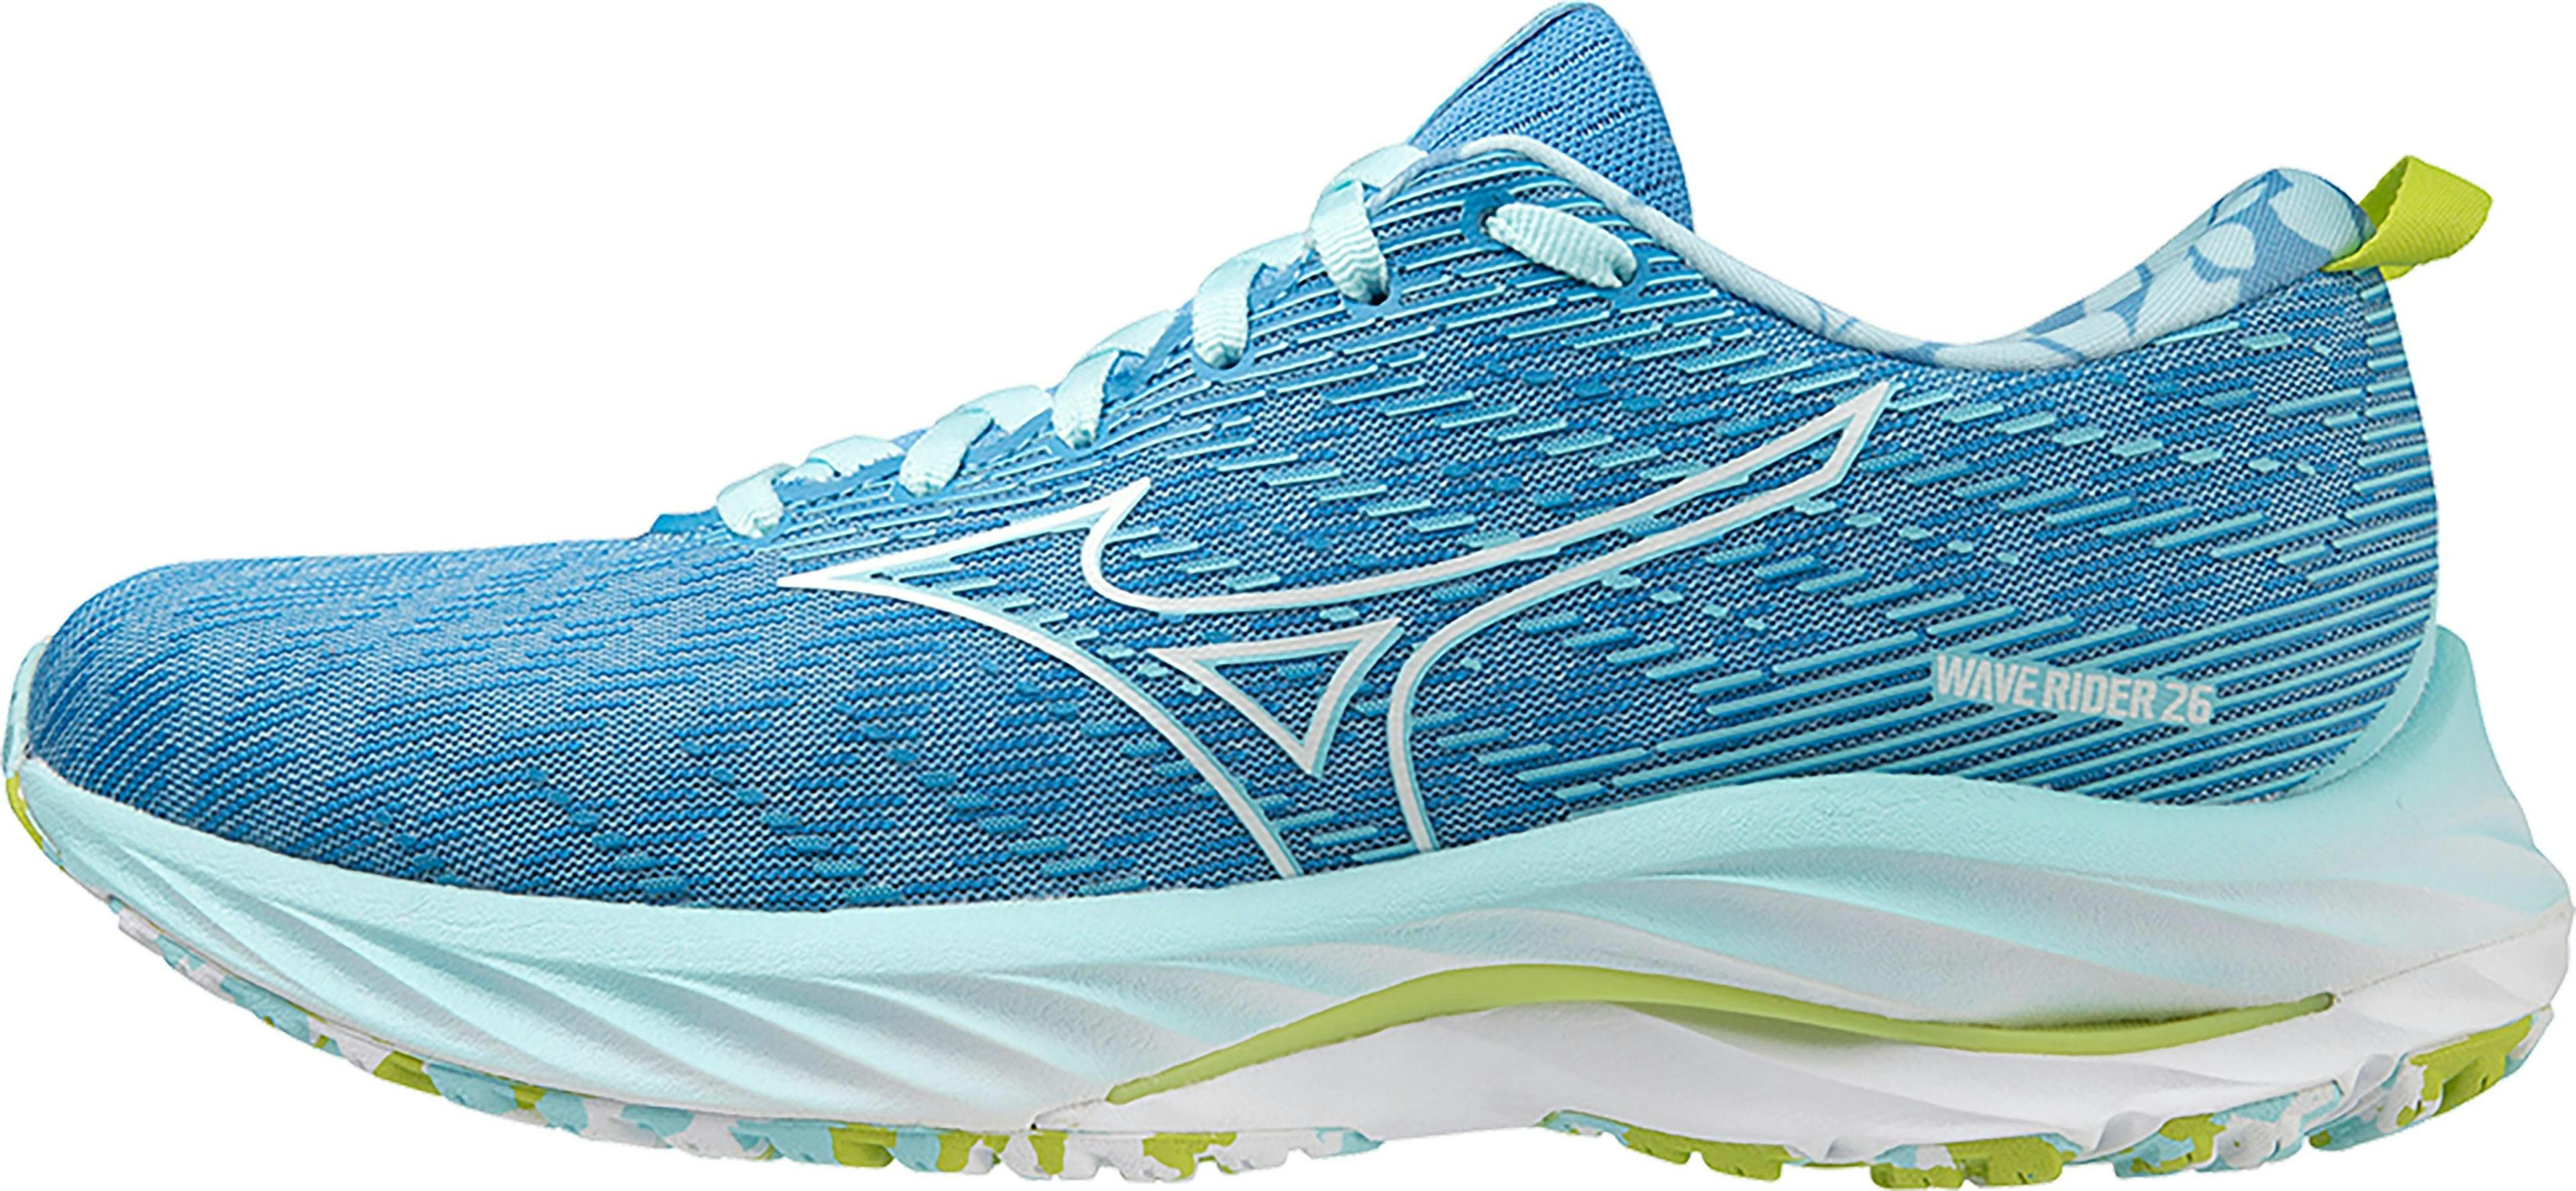 Product image for Wave Rider 26 Roxy Road Running Shoes - Women's